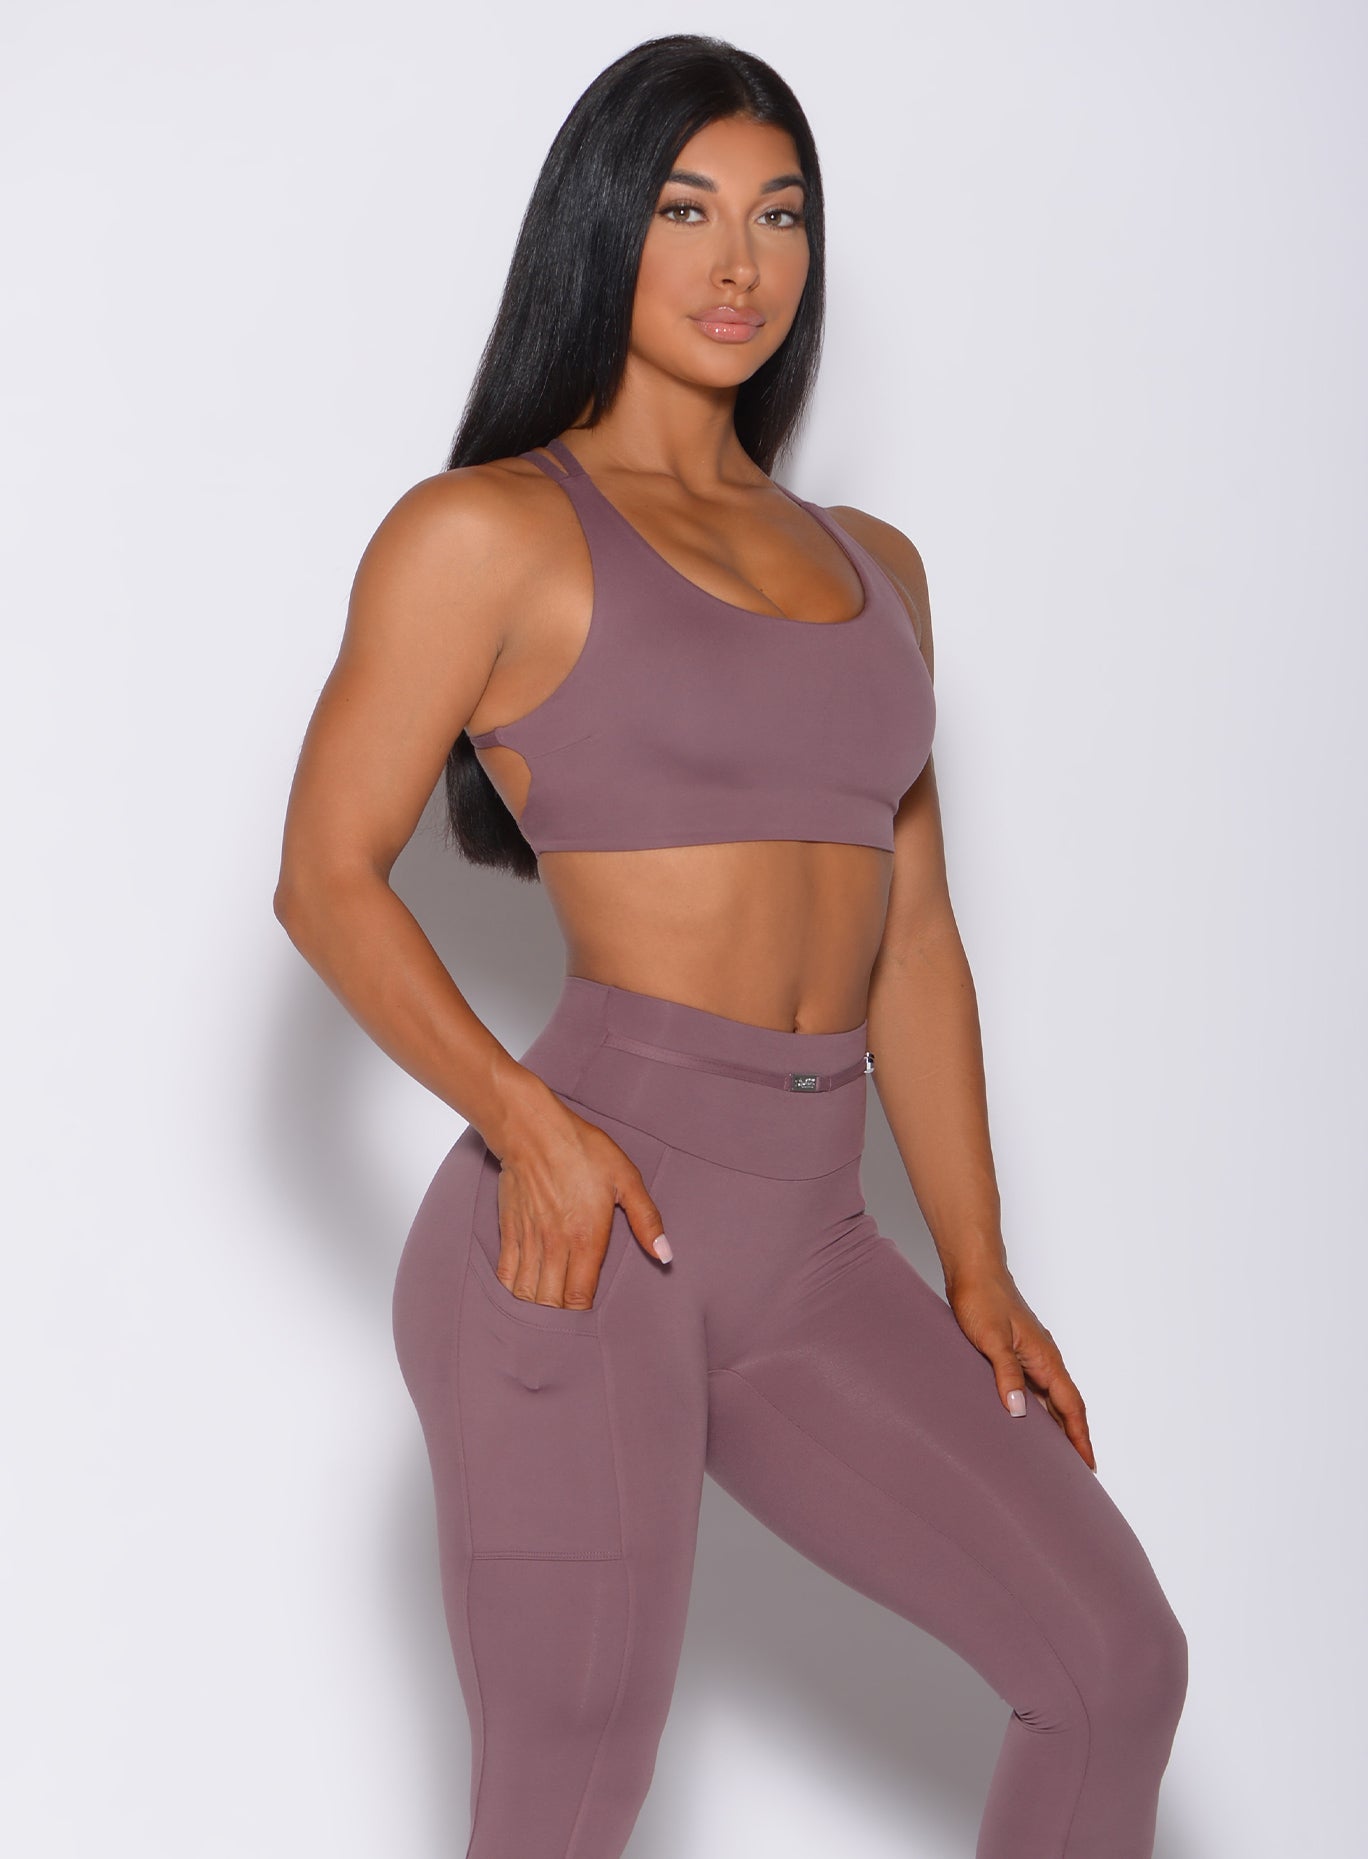 Right side profile view of a model with her right hand in pocket wearing our mauve barbell sports bra and a matching leggings